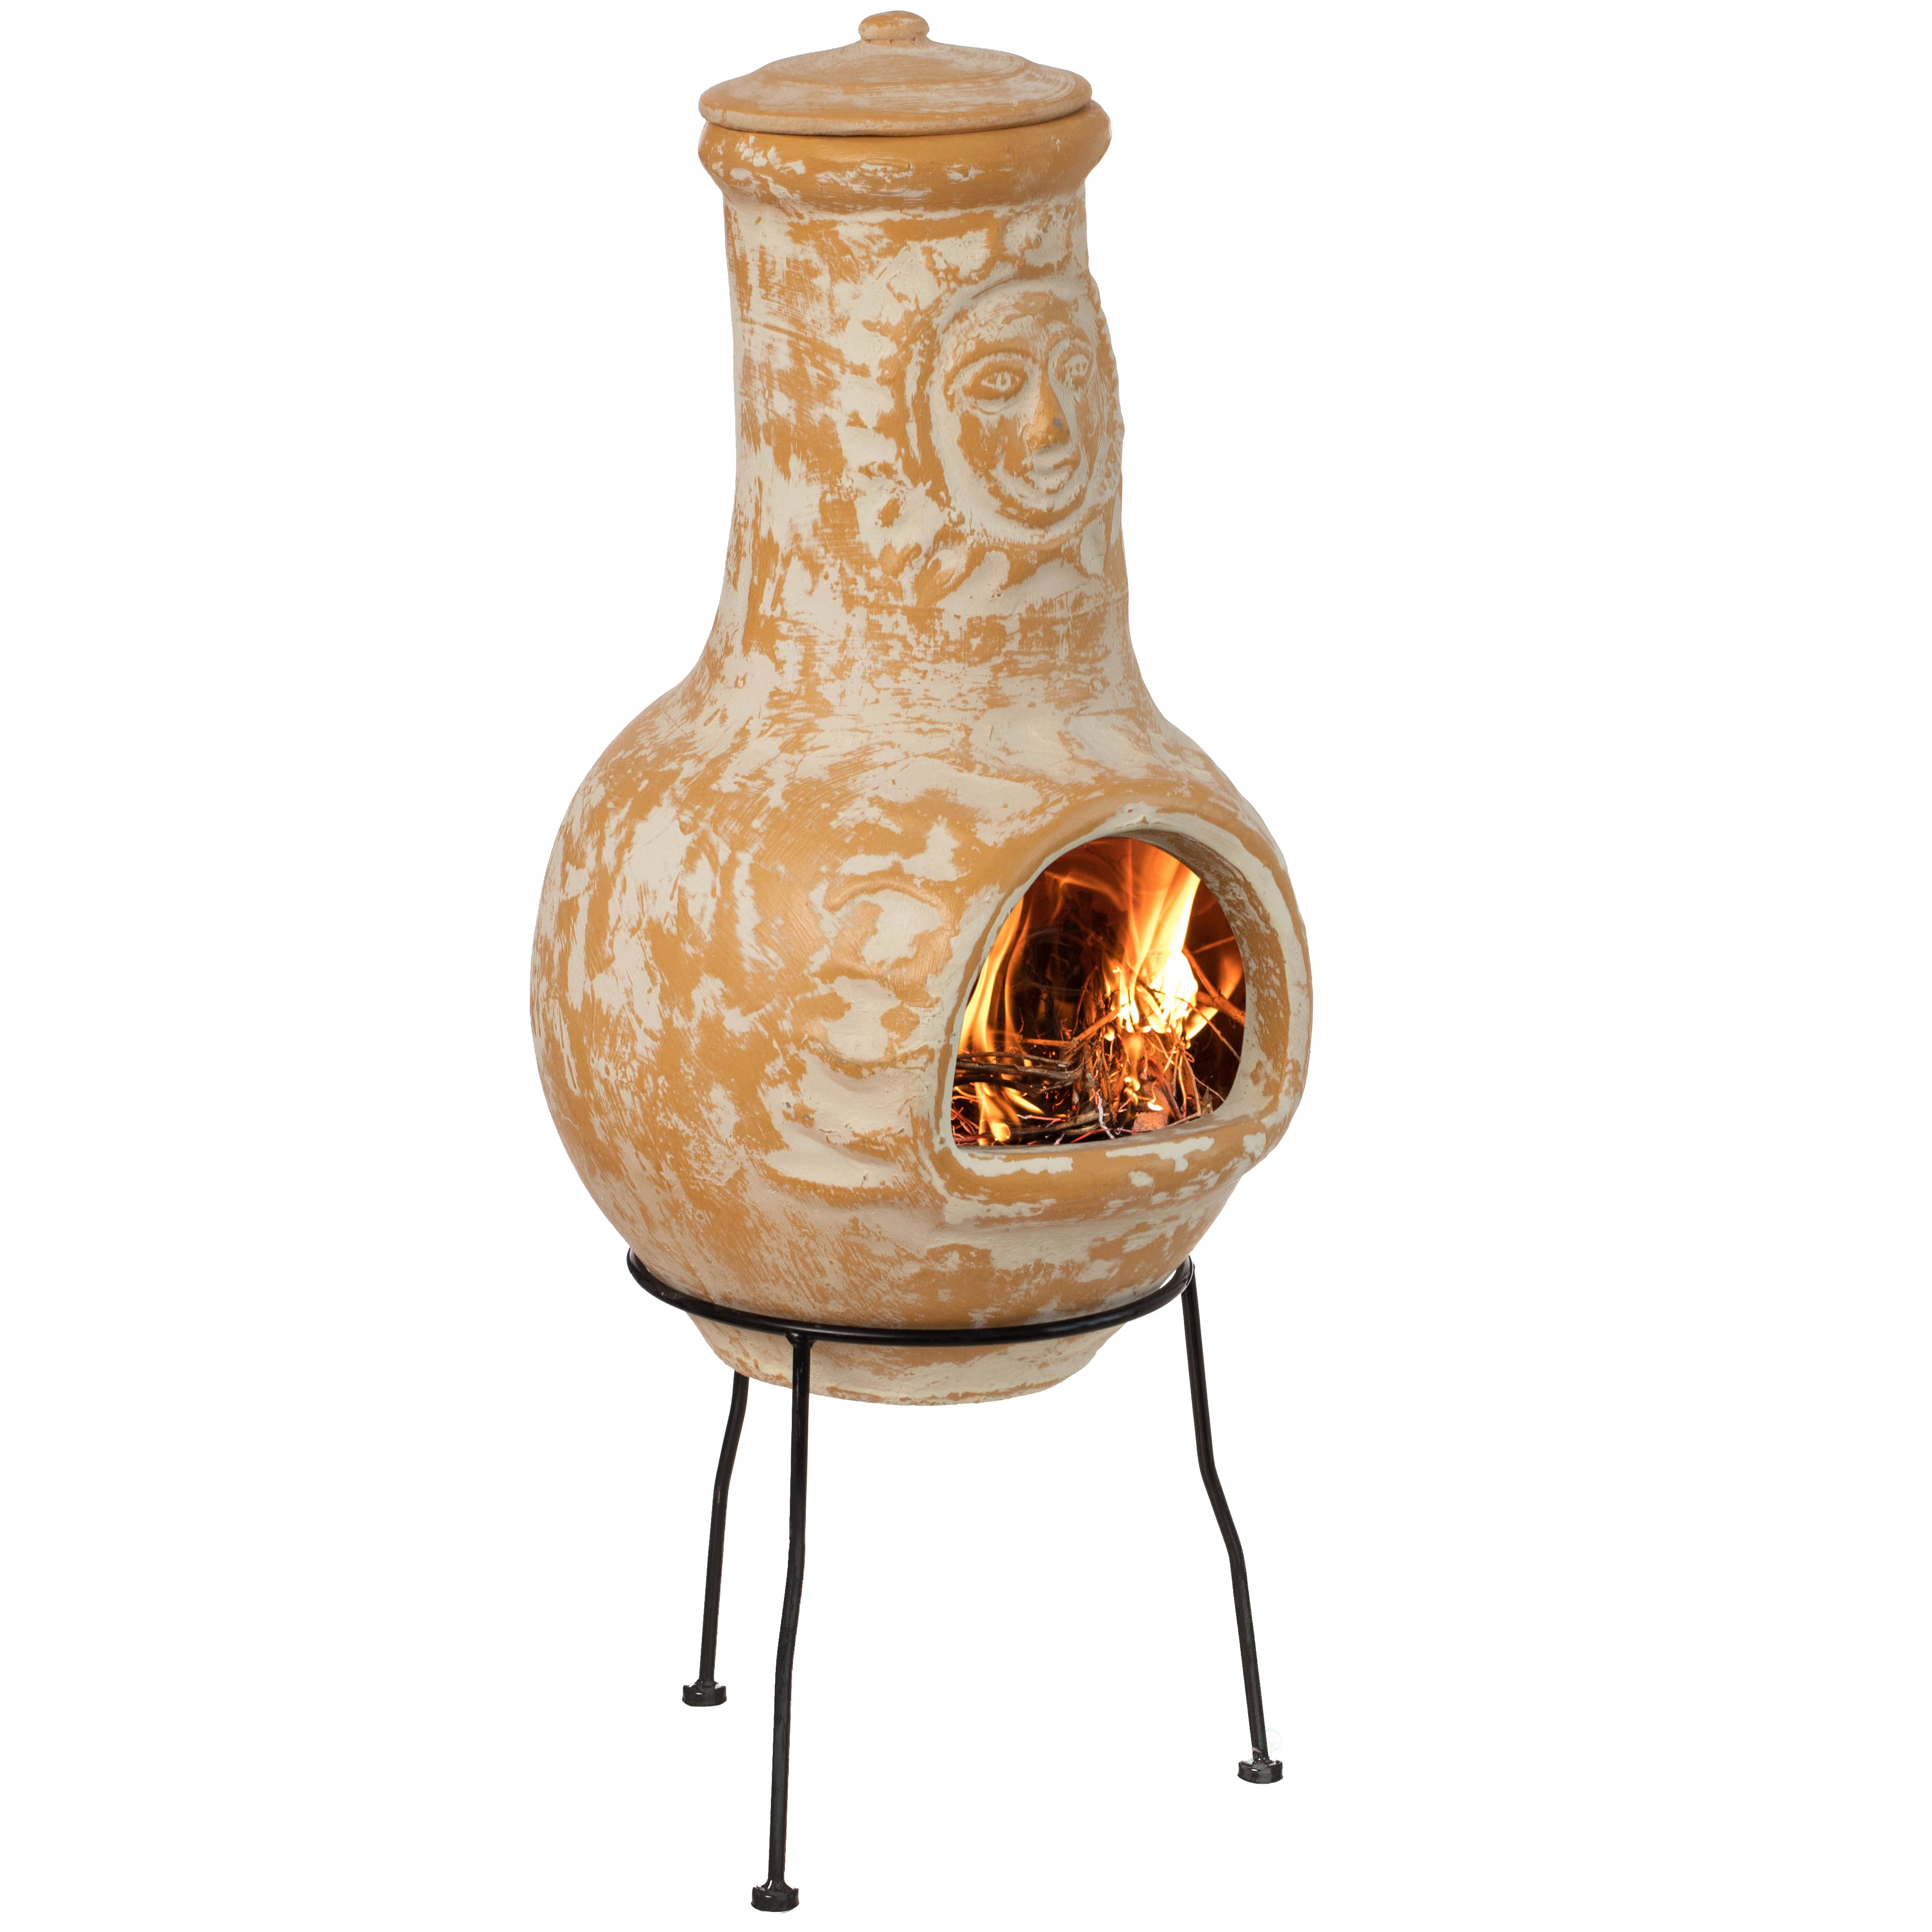 Outdoor Clay Chiminea Fireplace Sun Design Wood Burning Fire Pit With Sturdy Metal Stand, Barbecue, Cocktail Party, Cozy Nights Fire Pit - B